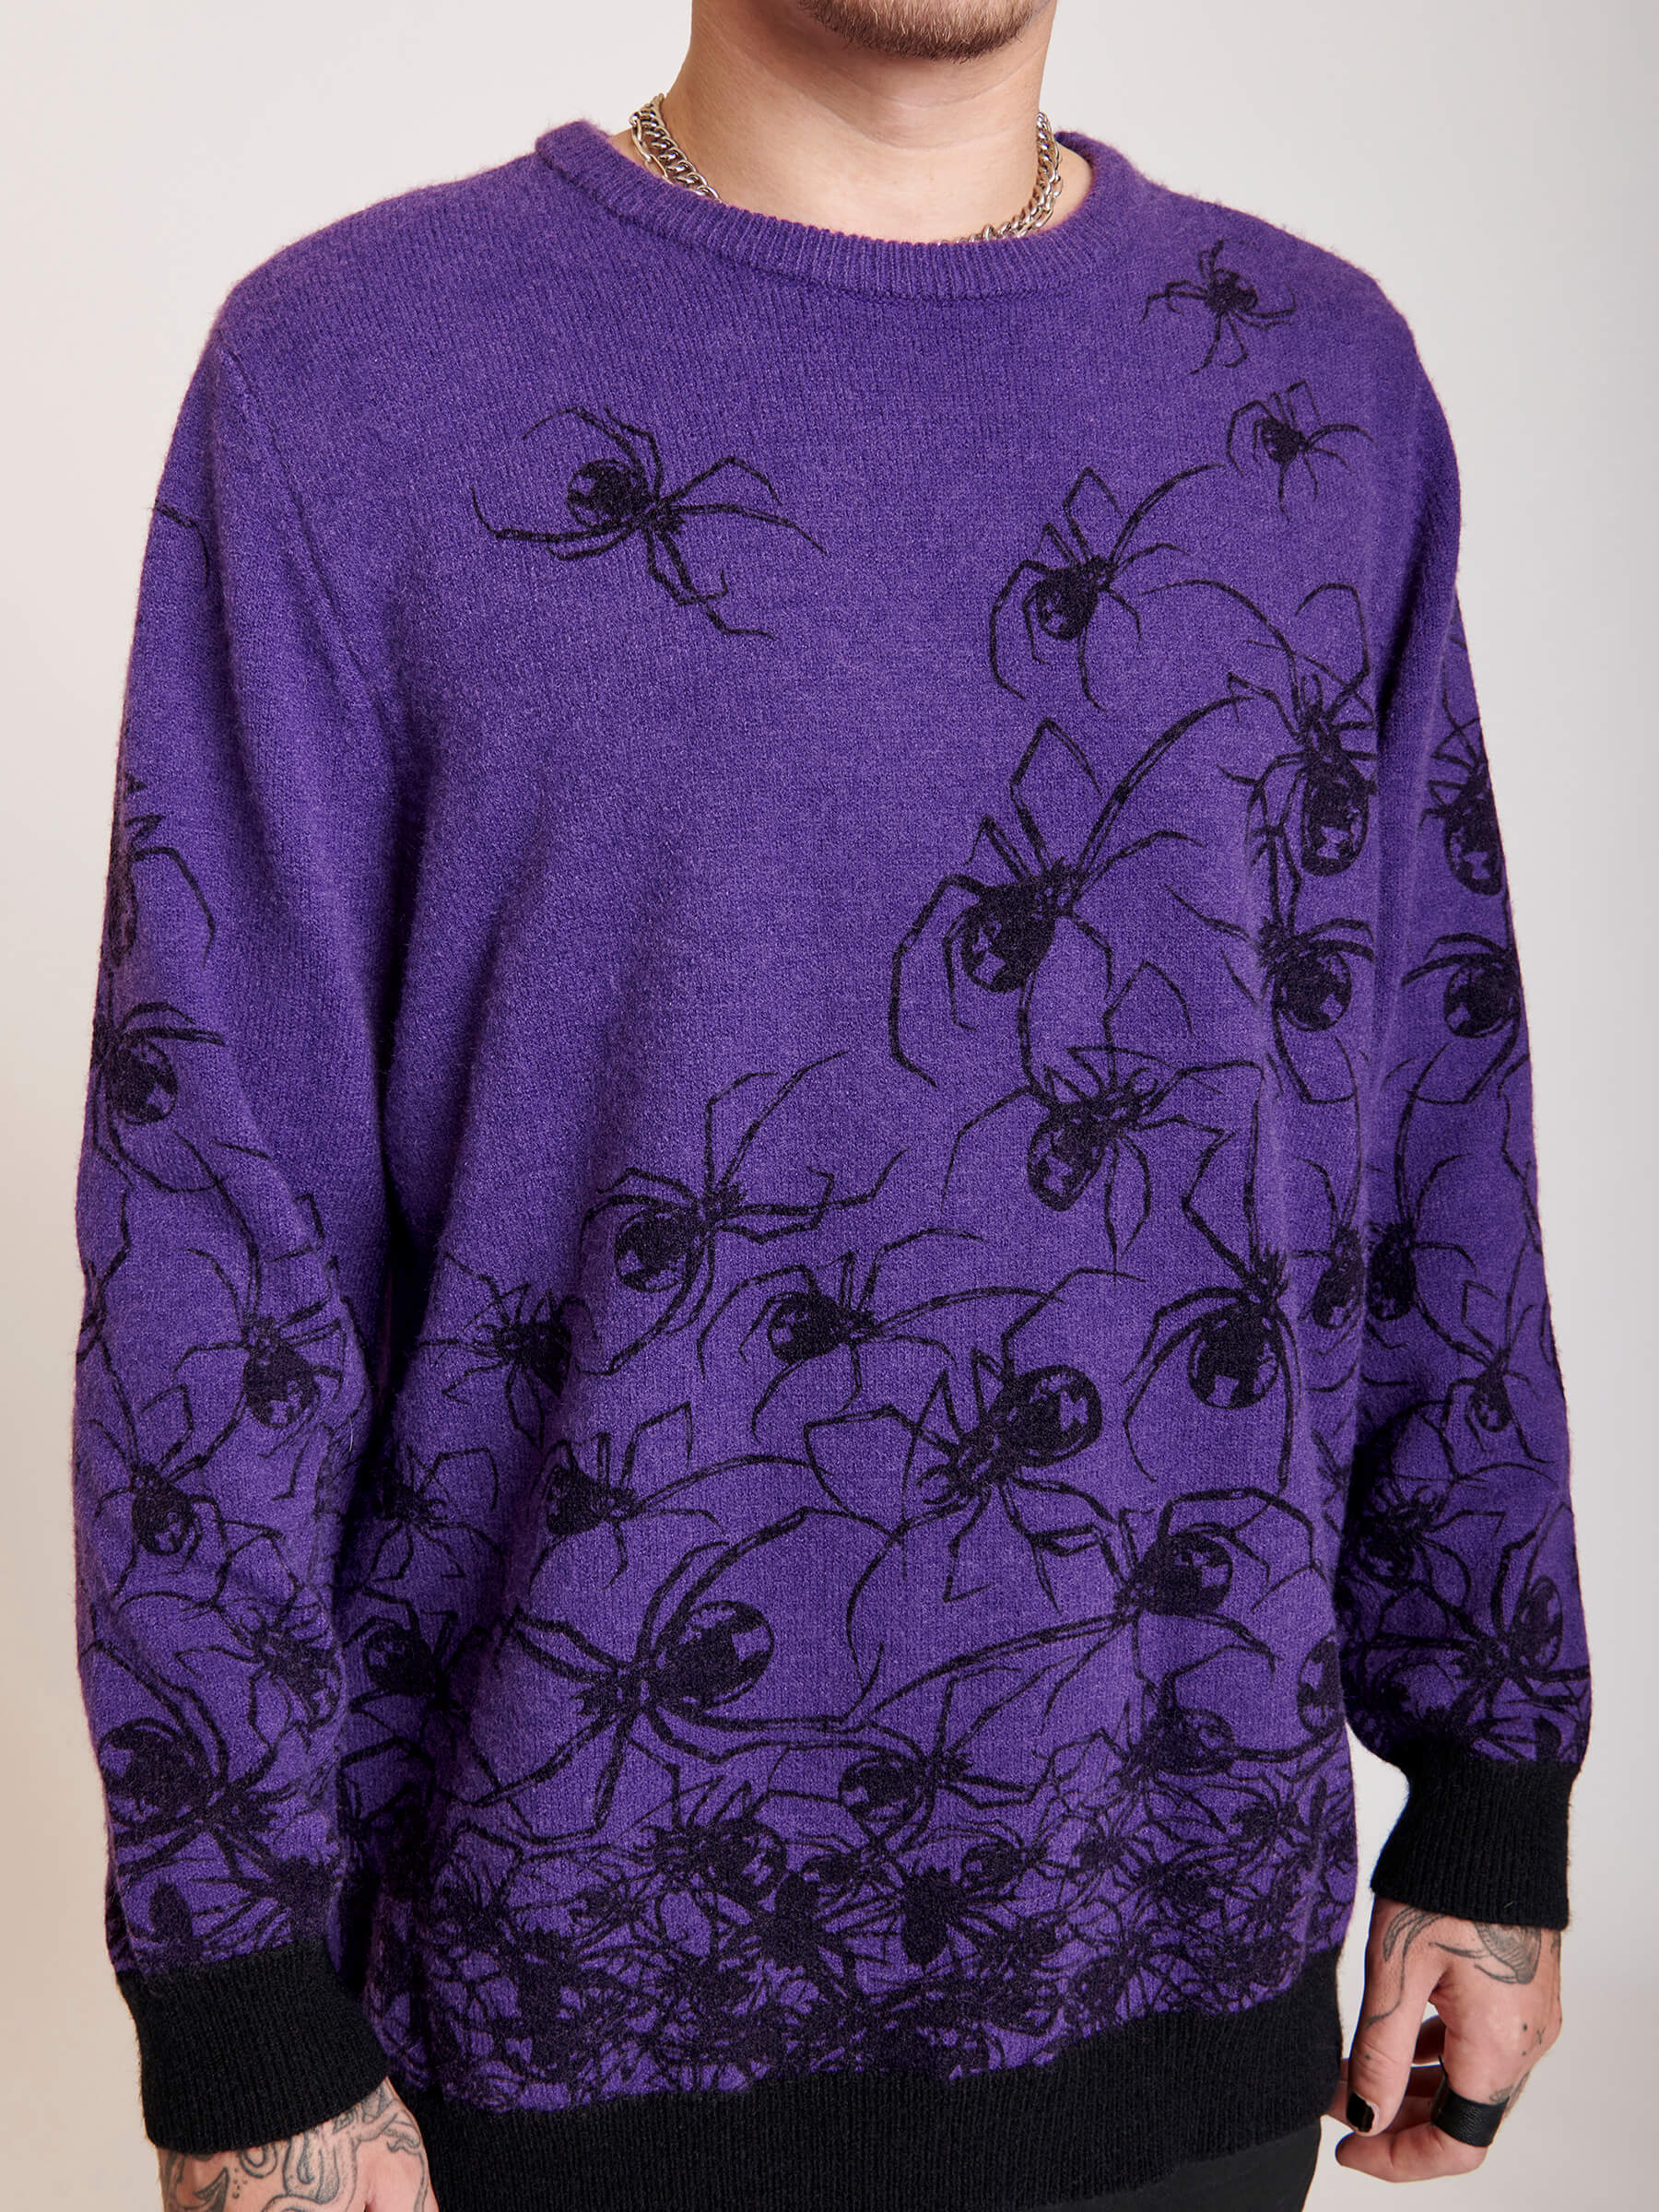  purple sweater with spiders all over